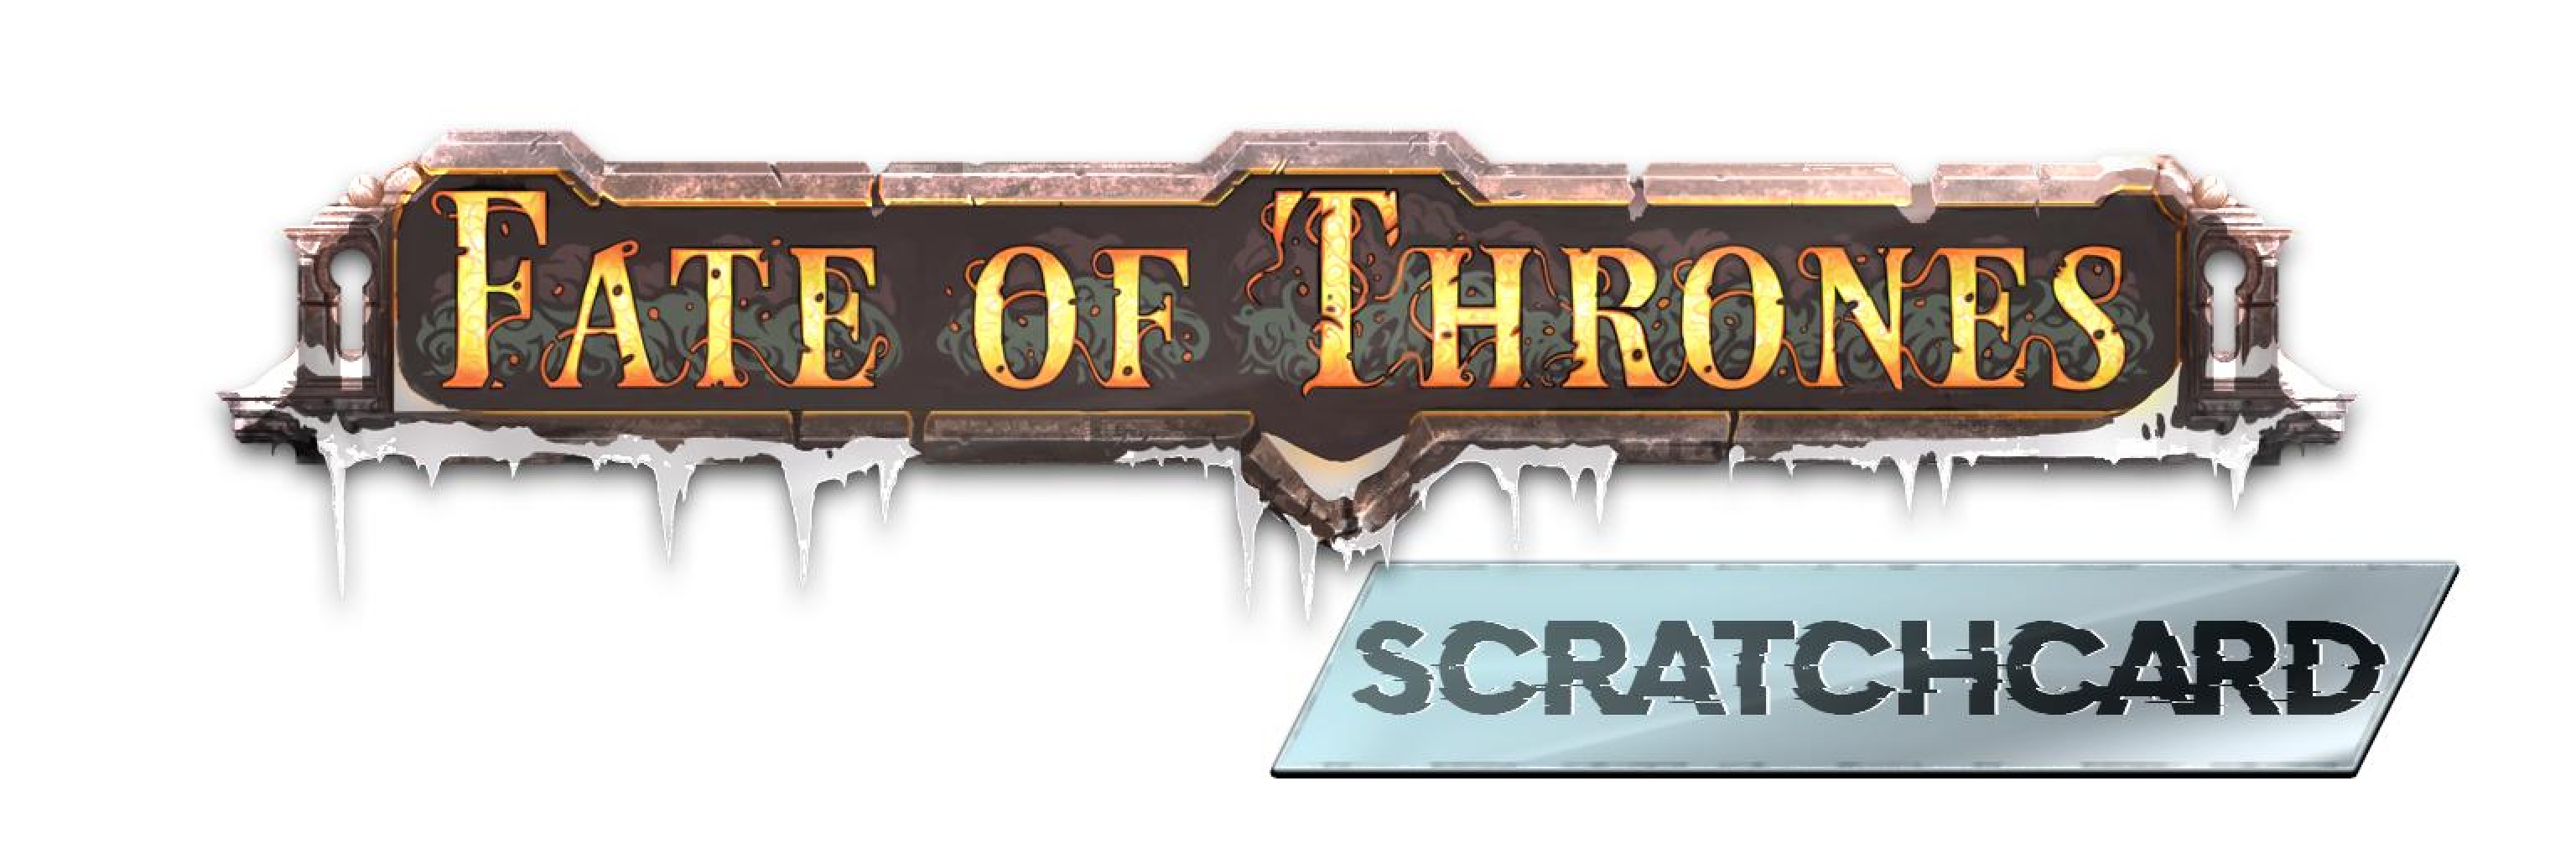 The Fate of Throne Scratchcard Online Slot Demo Game by FunFair